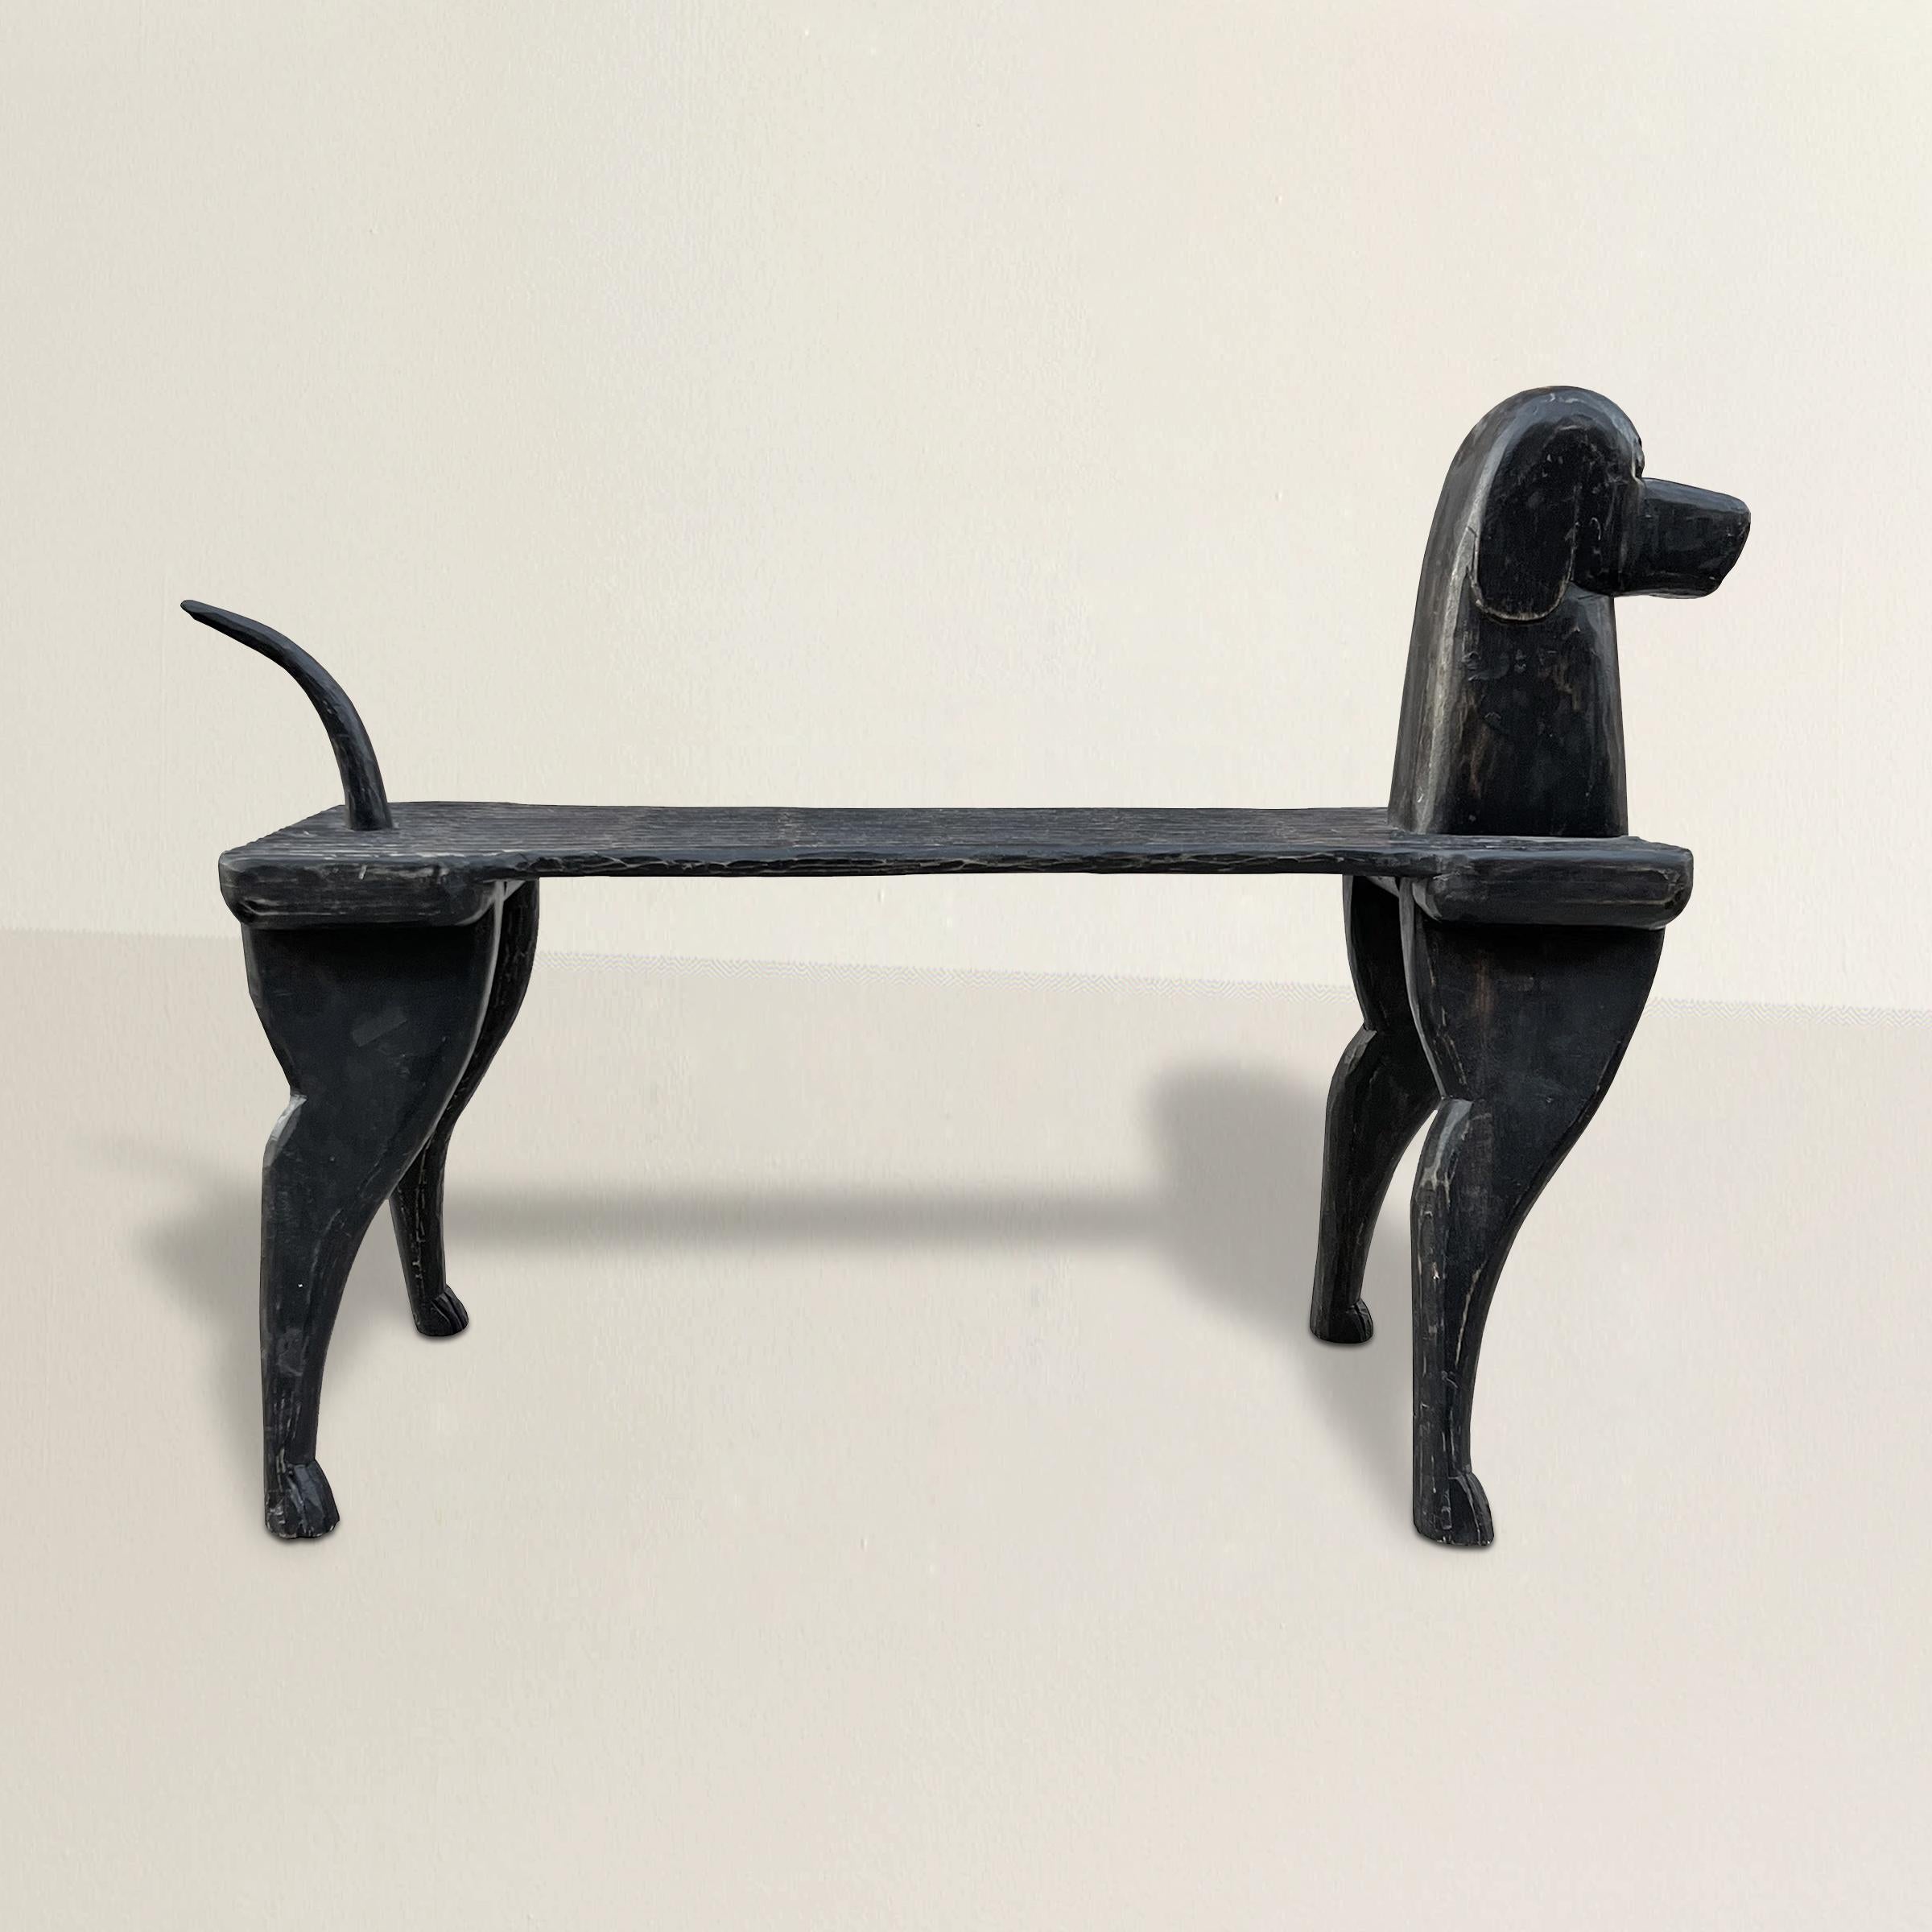 A wonderfully whimsical late 20th century hand carved wood dog bench by artist, Stephen Huseck. The bench features a rough hewn seat with a four legs, and movable tail, and a dog head with a sweet disposition. Perfect for extra seating in front of